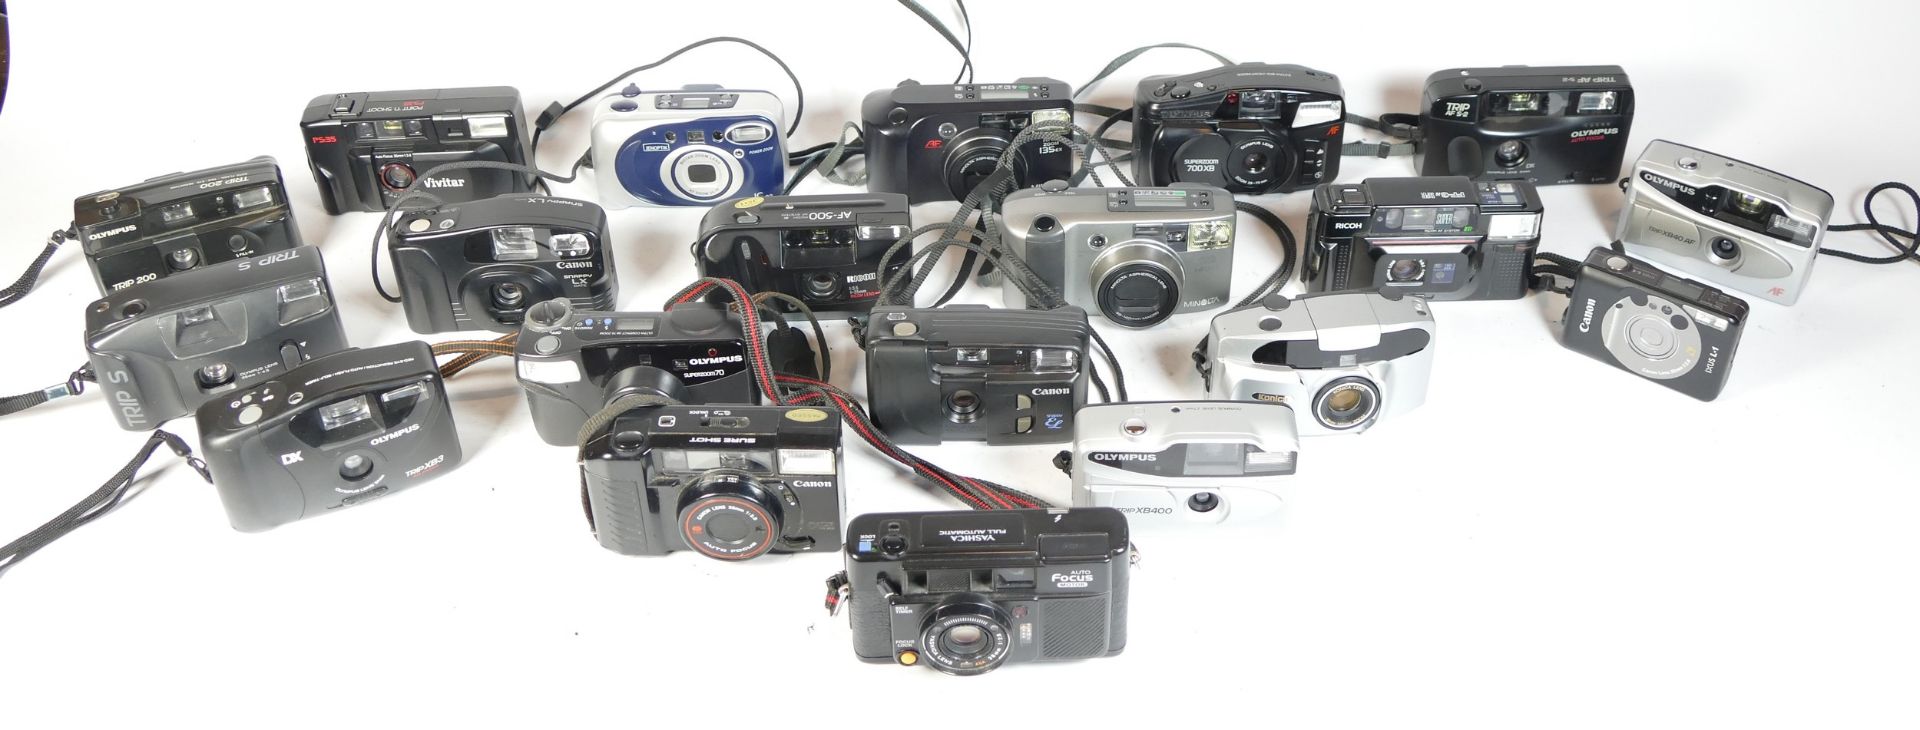 Twenty compact film cameras to include a Canon Sure Shot, a Yashica, an Olympus Trip XB40 AF and a